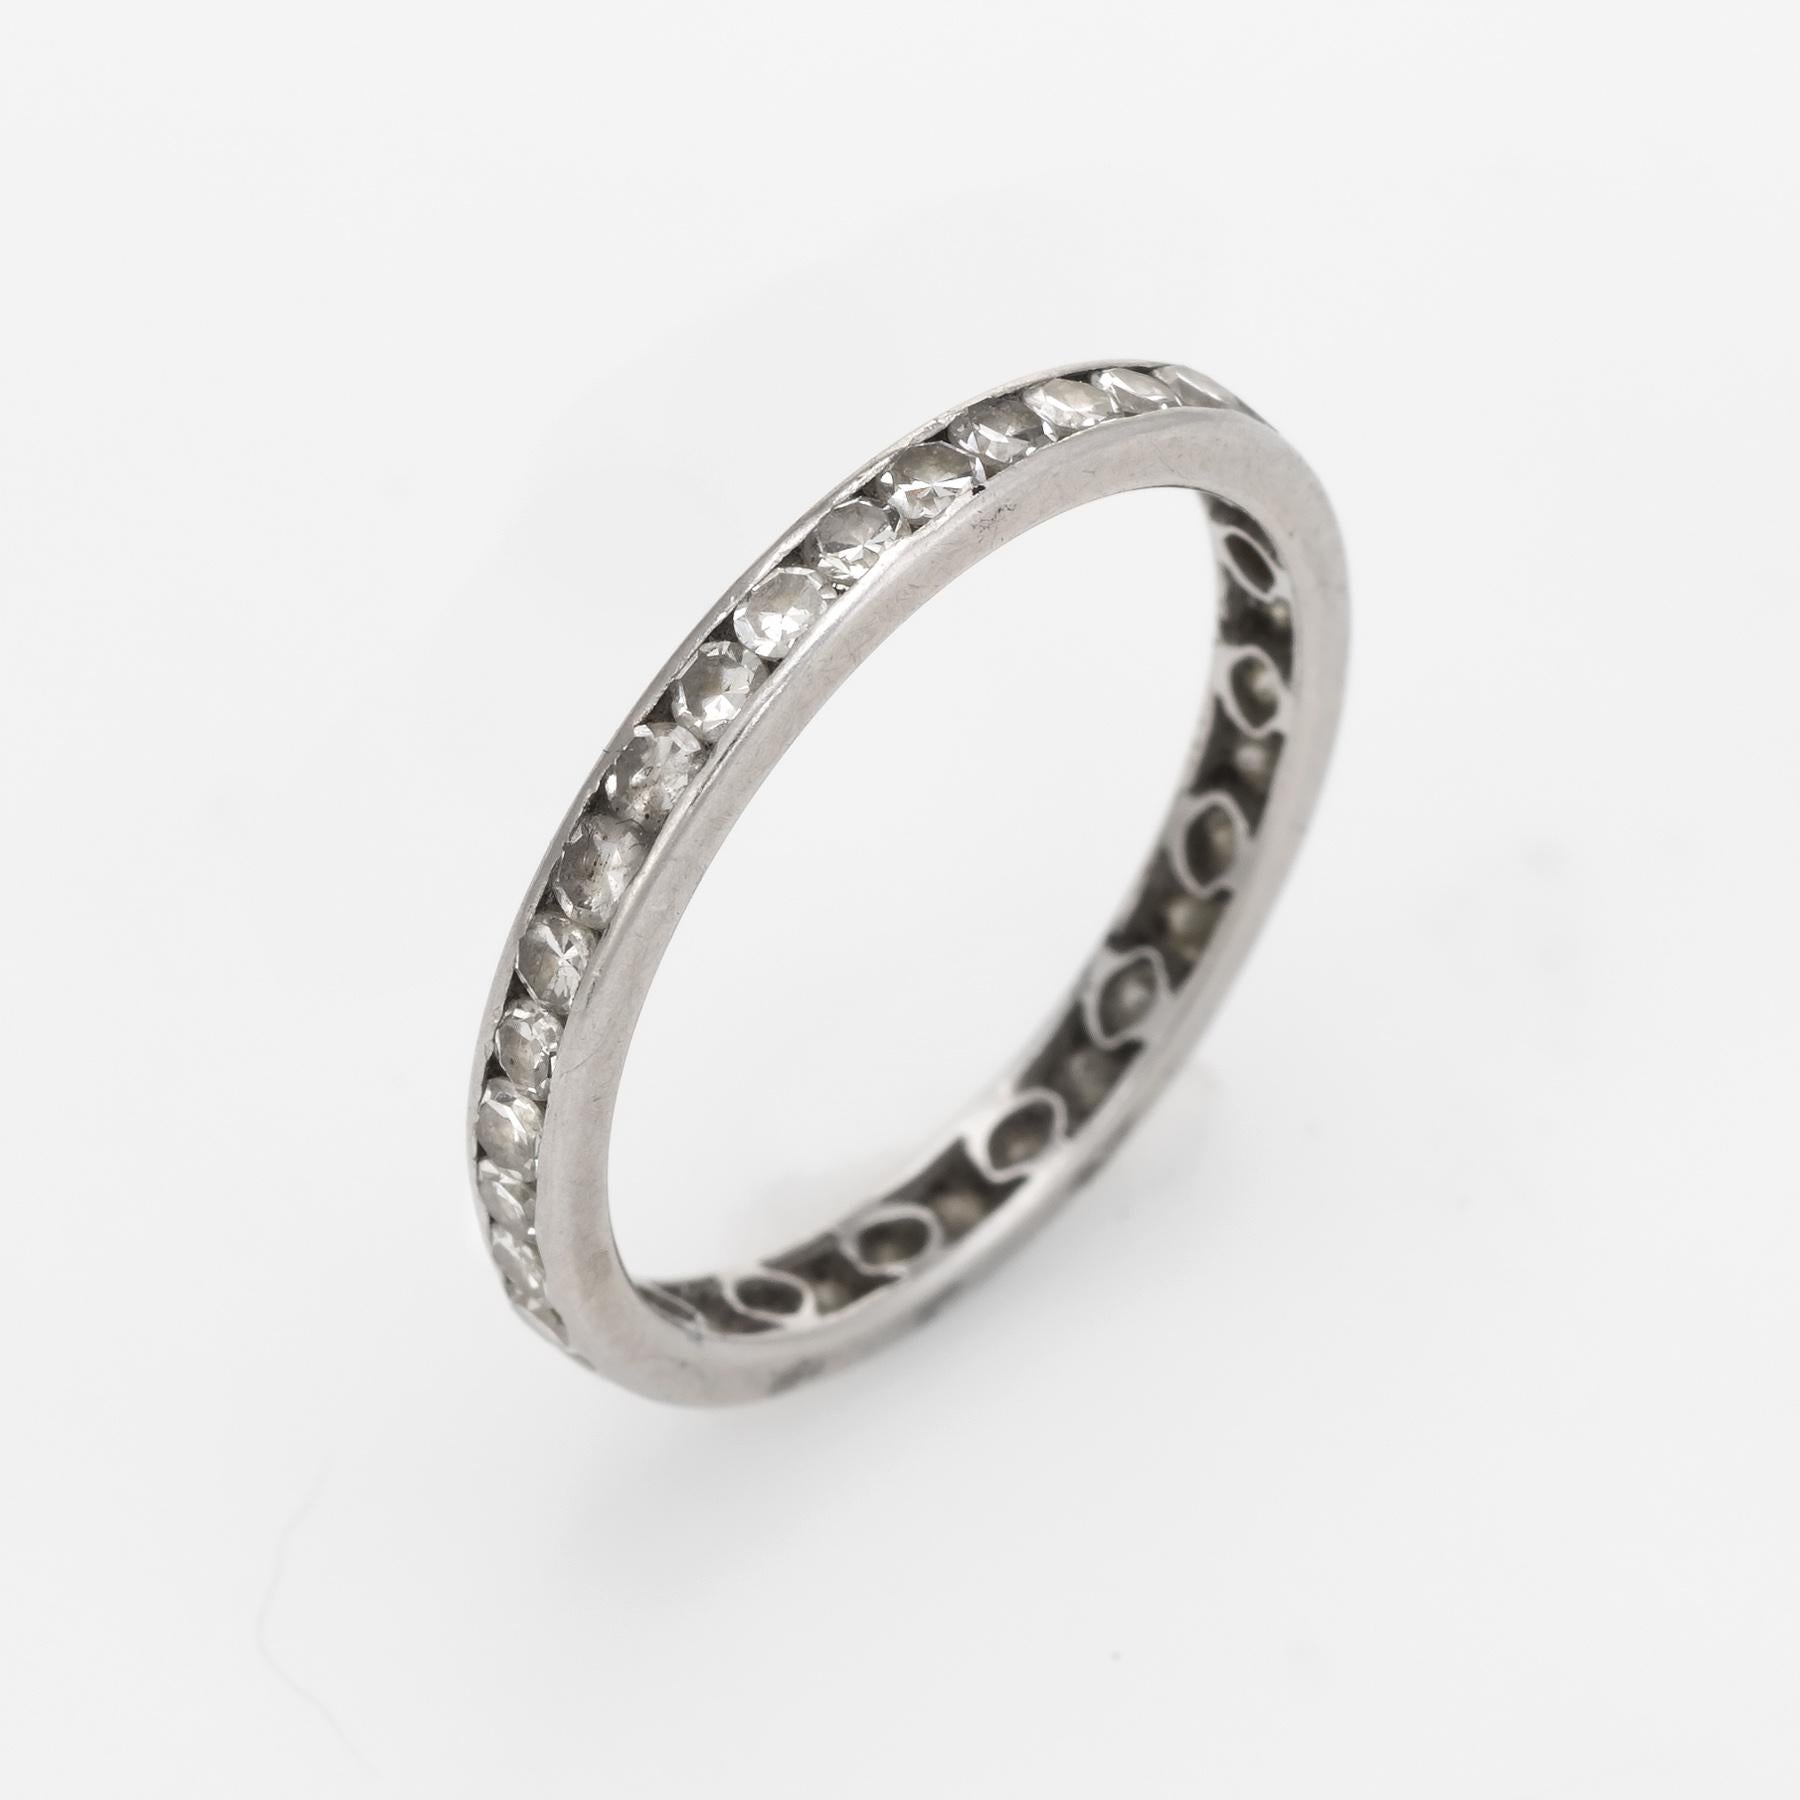 Elegant vintage Art Deco era eternity ring (circa 1920s to 1930s), crafted in 900 platinum. 

34 single cut diamonds are estimated at 0.02 carats each and total an estimated 0.68 carats (estimated at H-I color and VS2-SI1 clarity).  

The ring is in